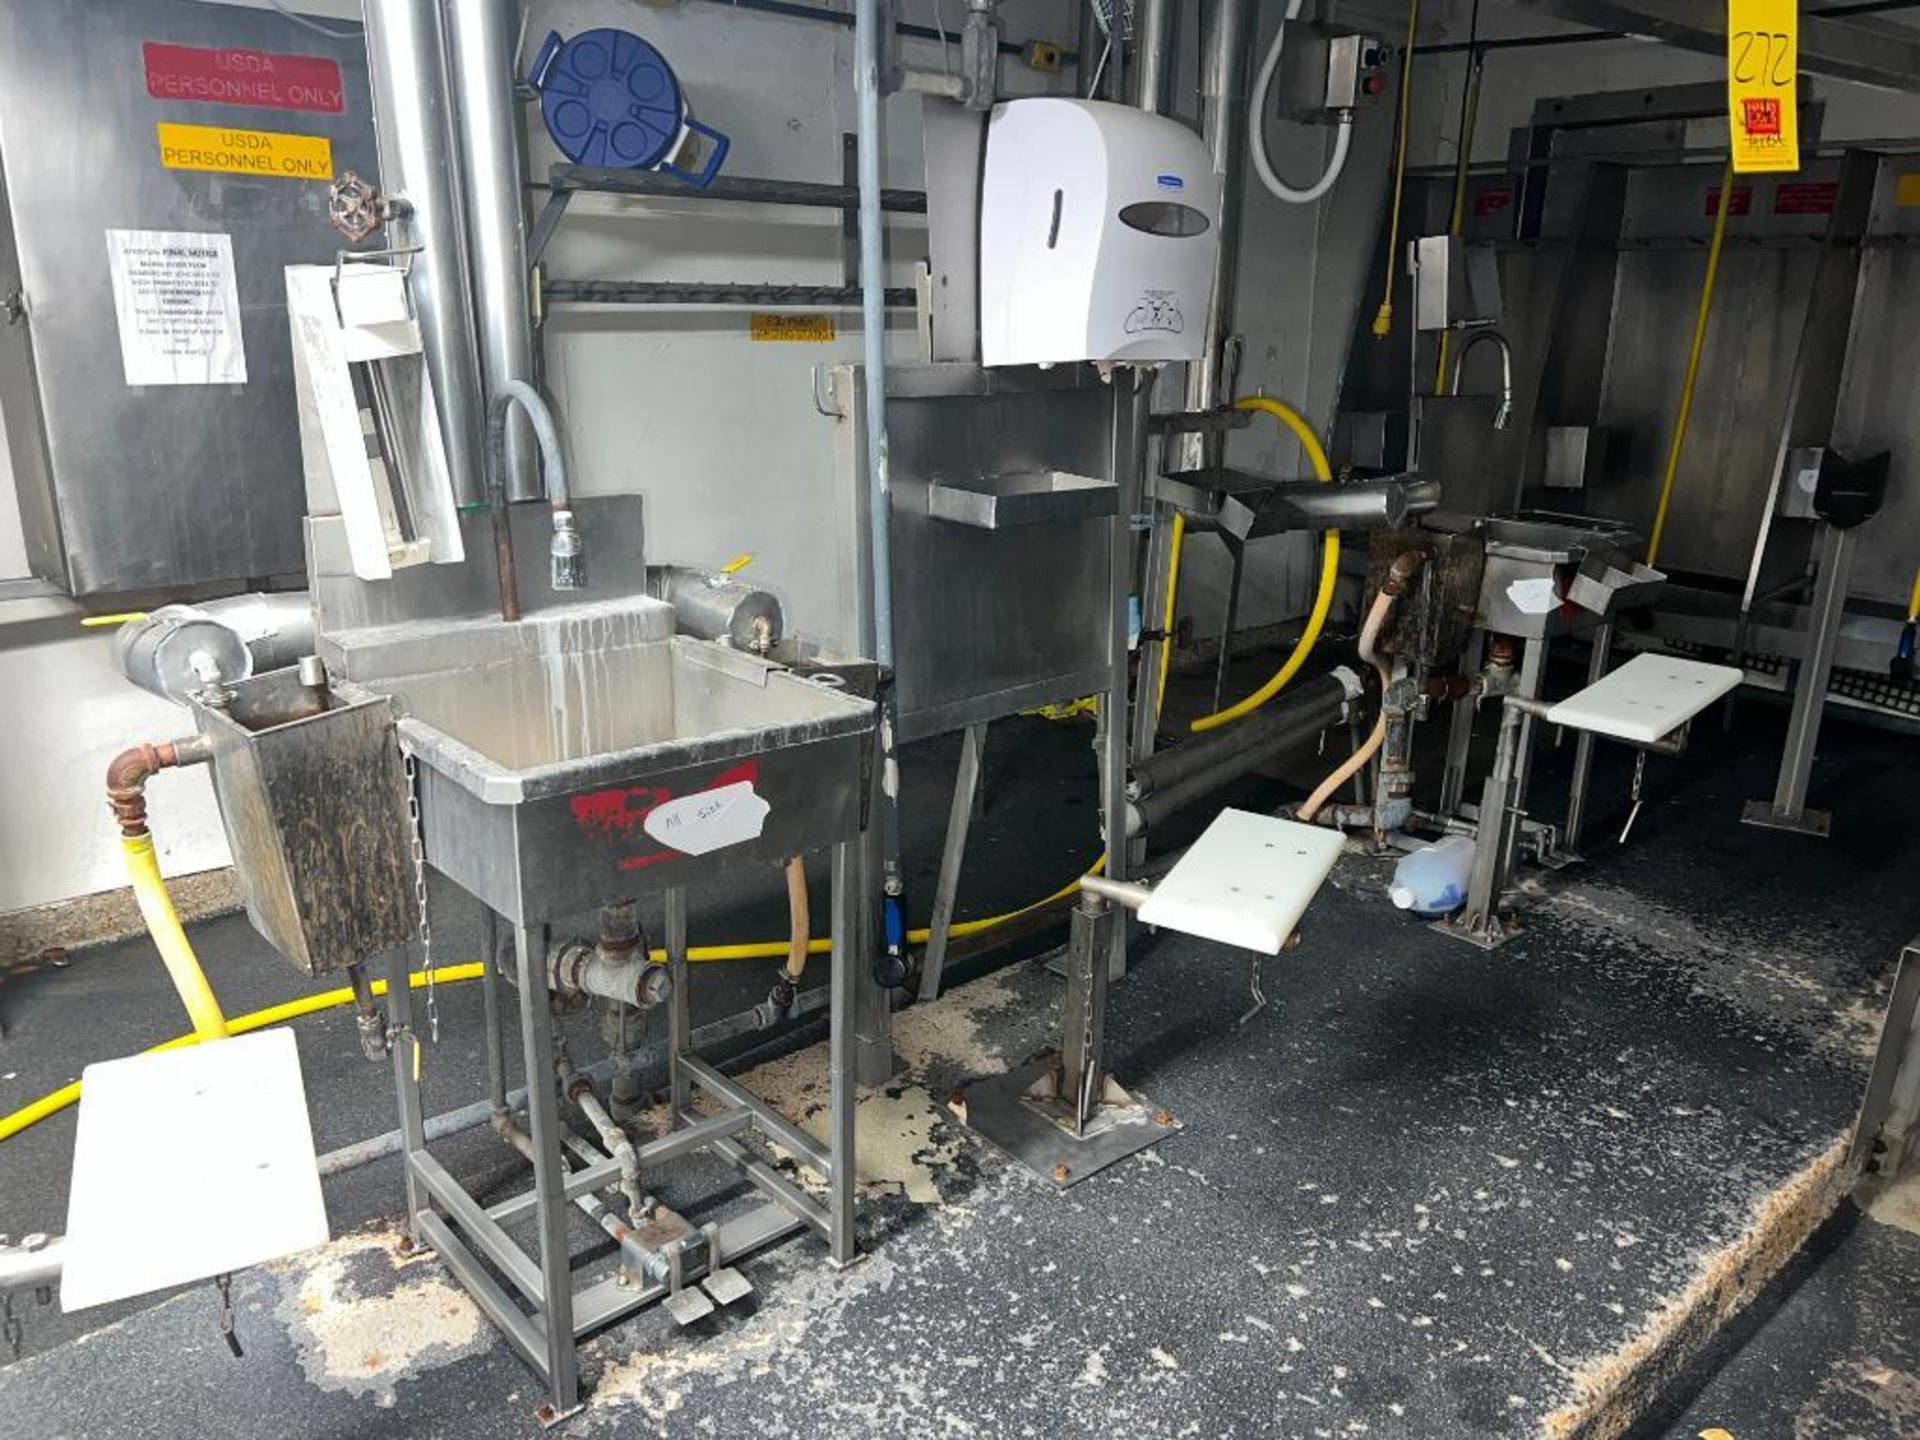 (3) S/S Sinks with Foot Controls and Assorted Wash Cabinets and Bins - Rigging Fee: $300